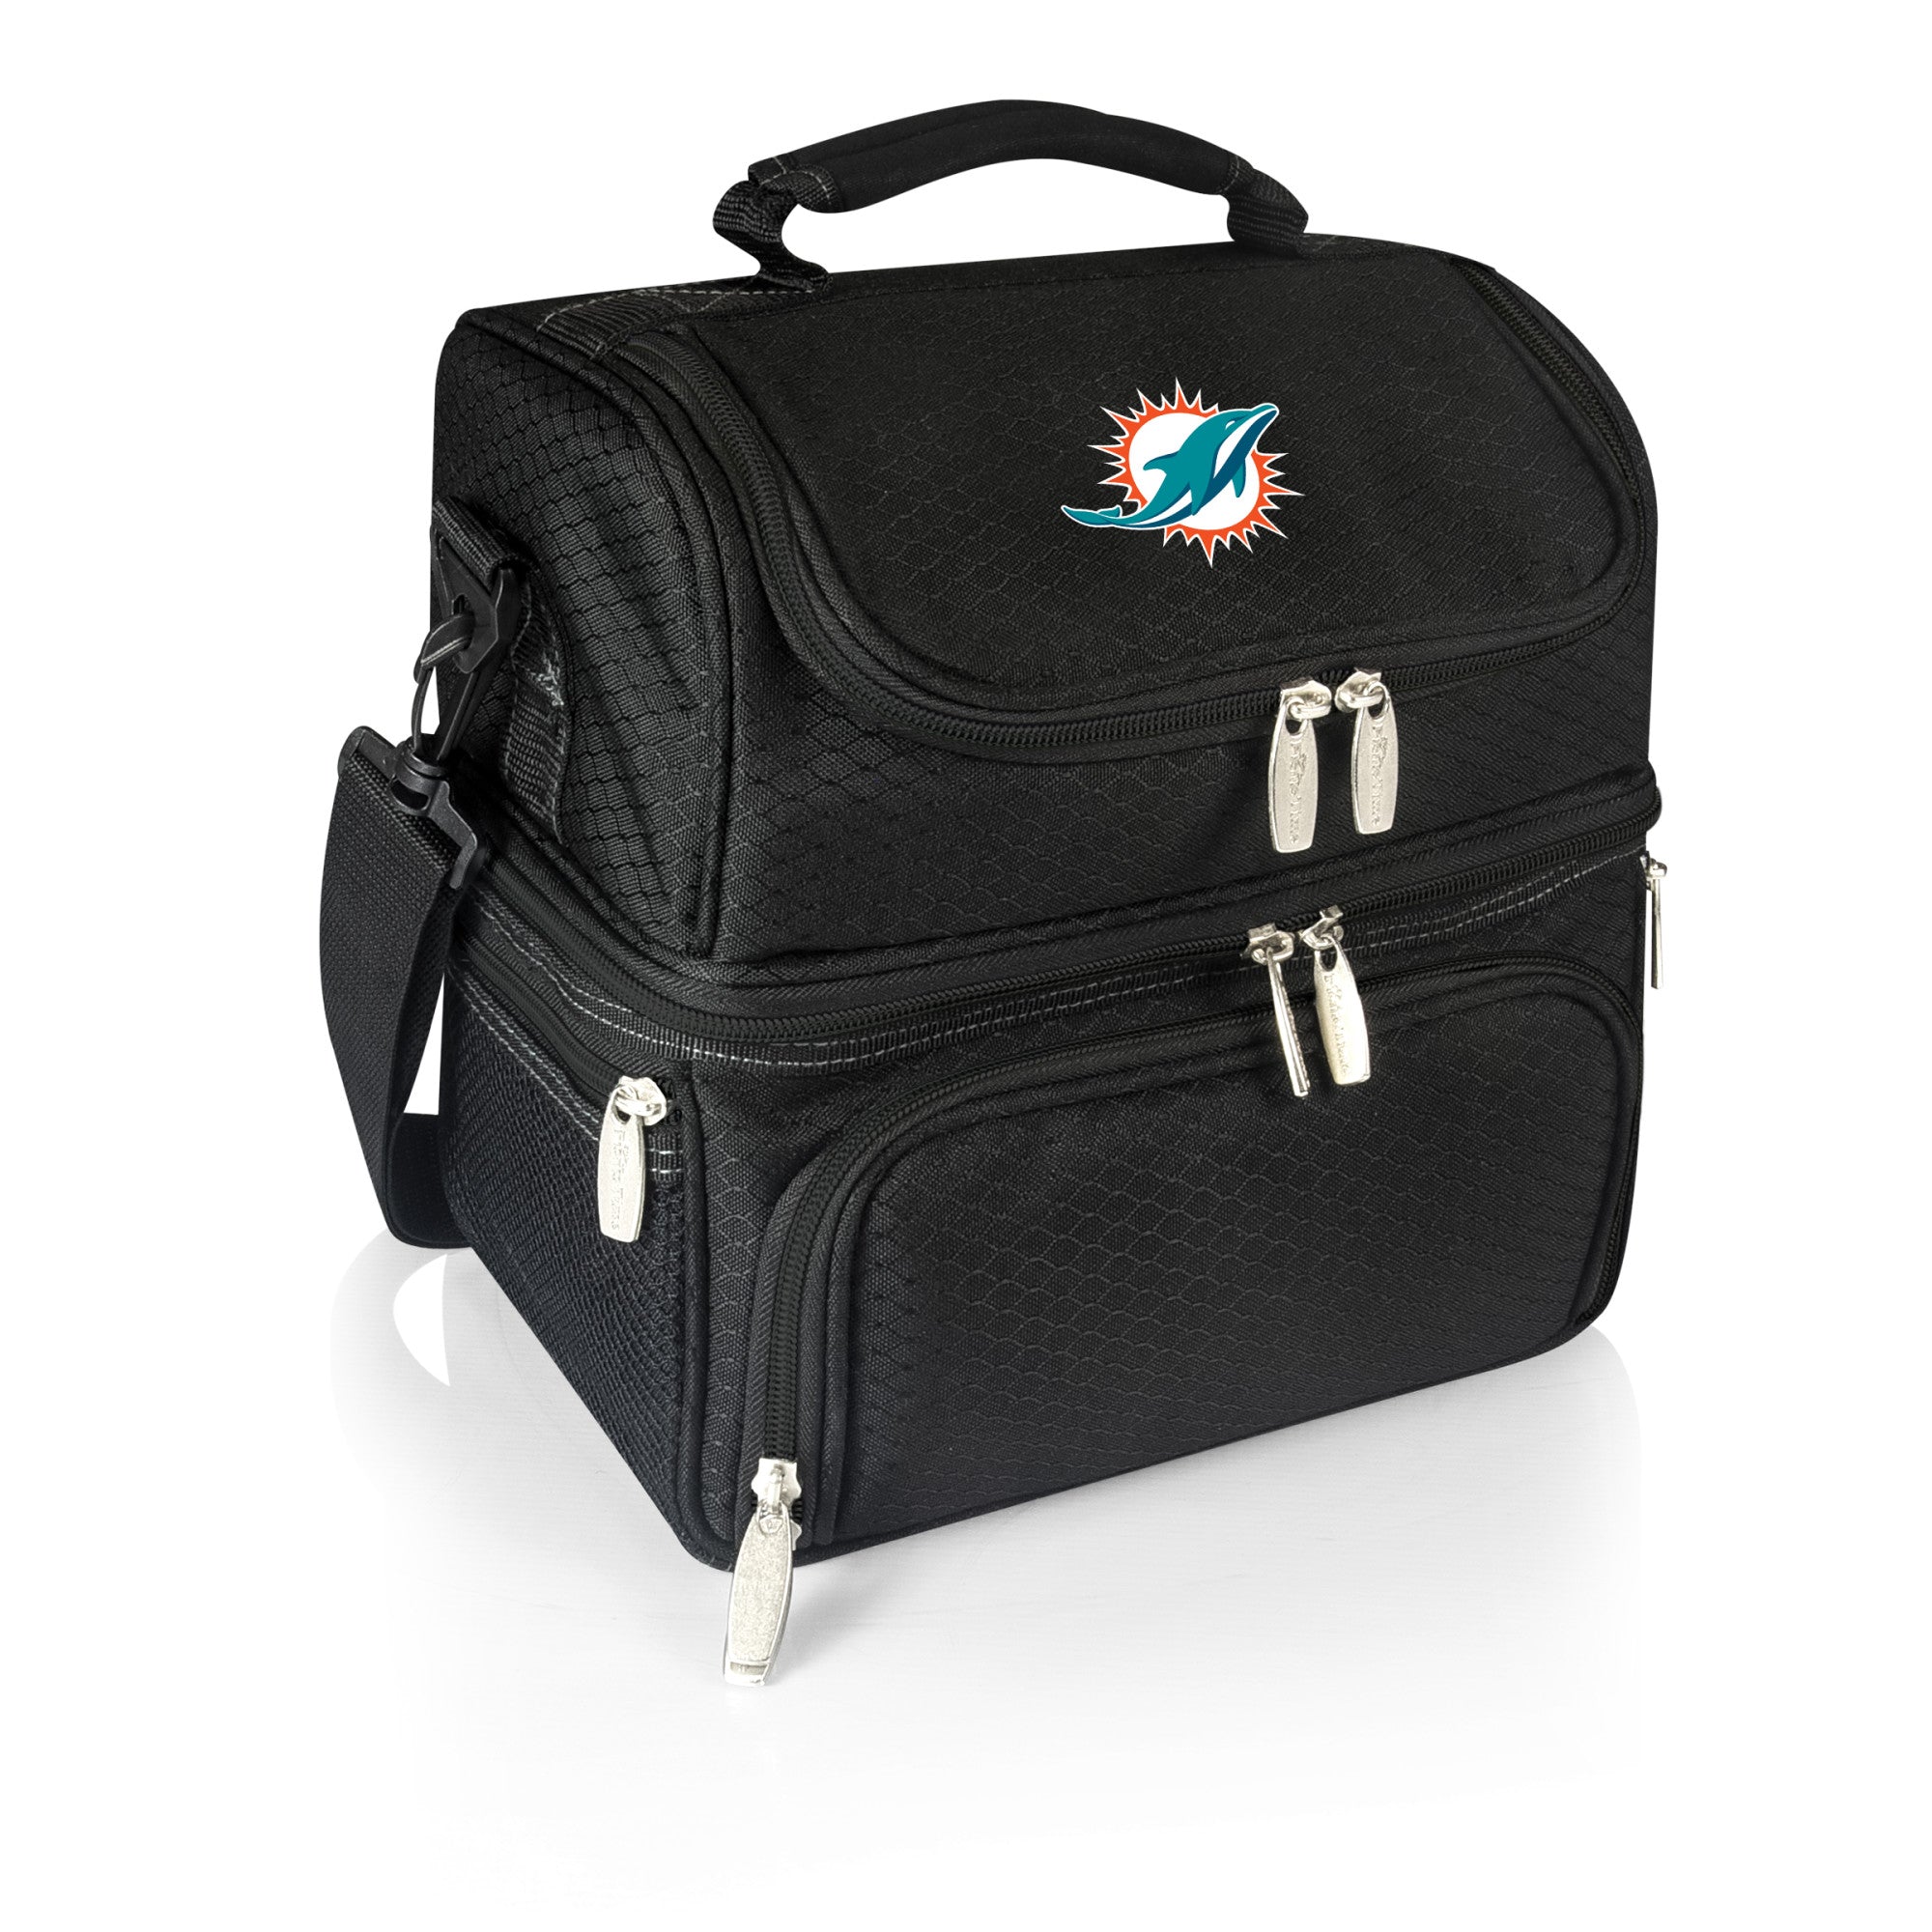 Miami Dolphins - Pranzo Lunch Bag Cooler with Utensils